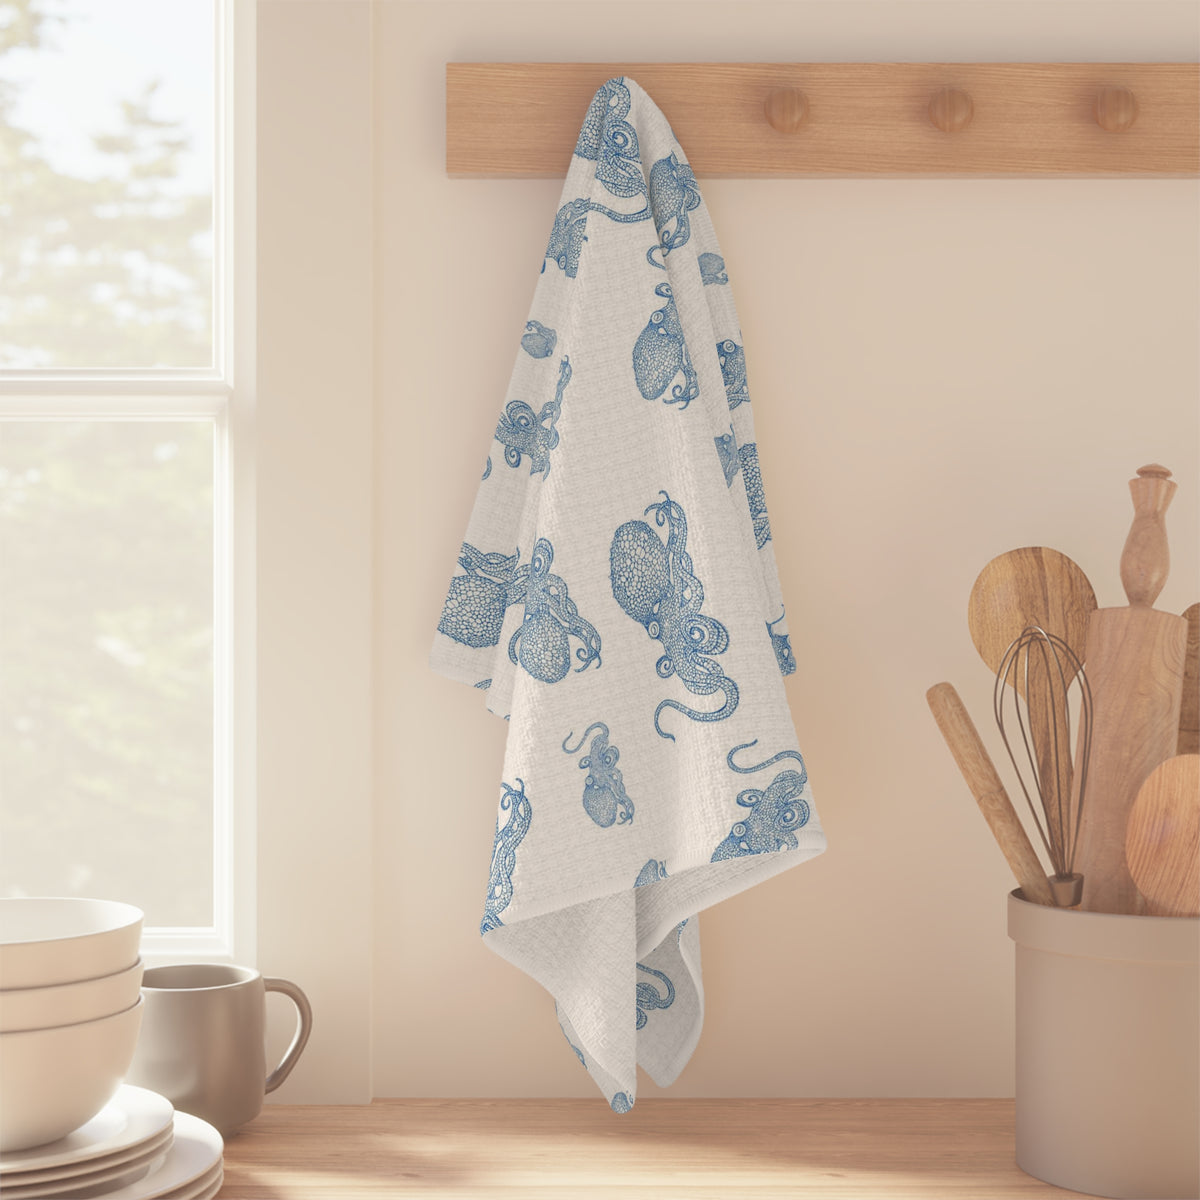 Blue Shop Towels Smooth Special